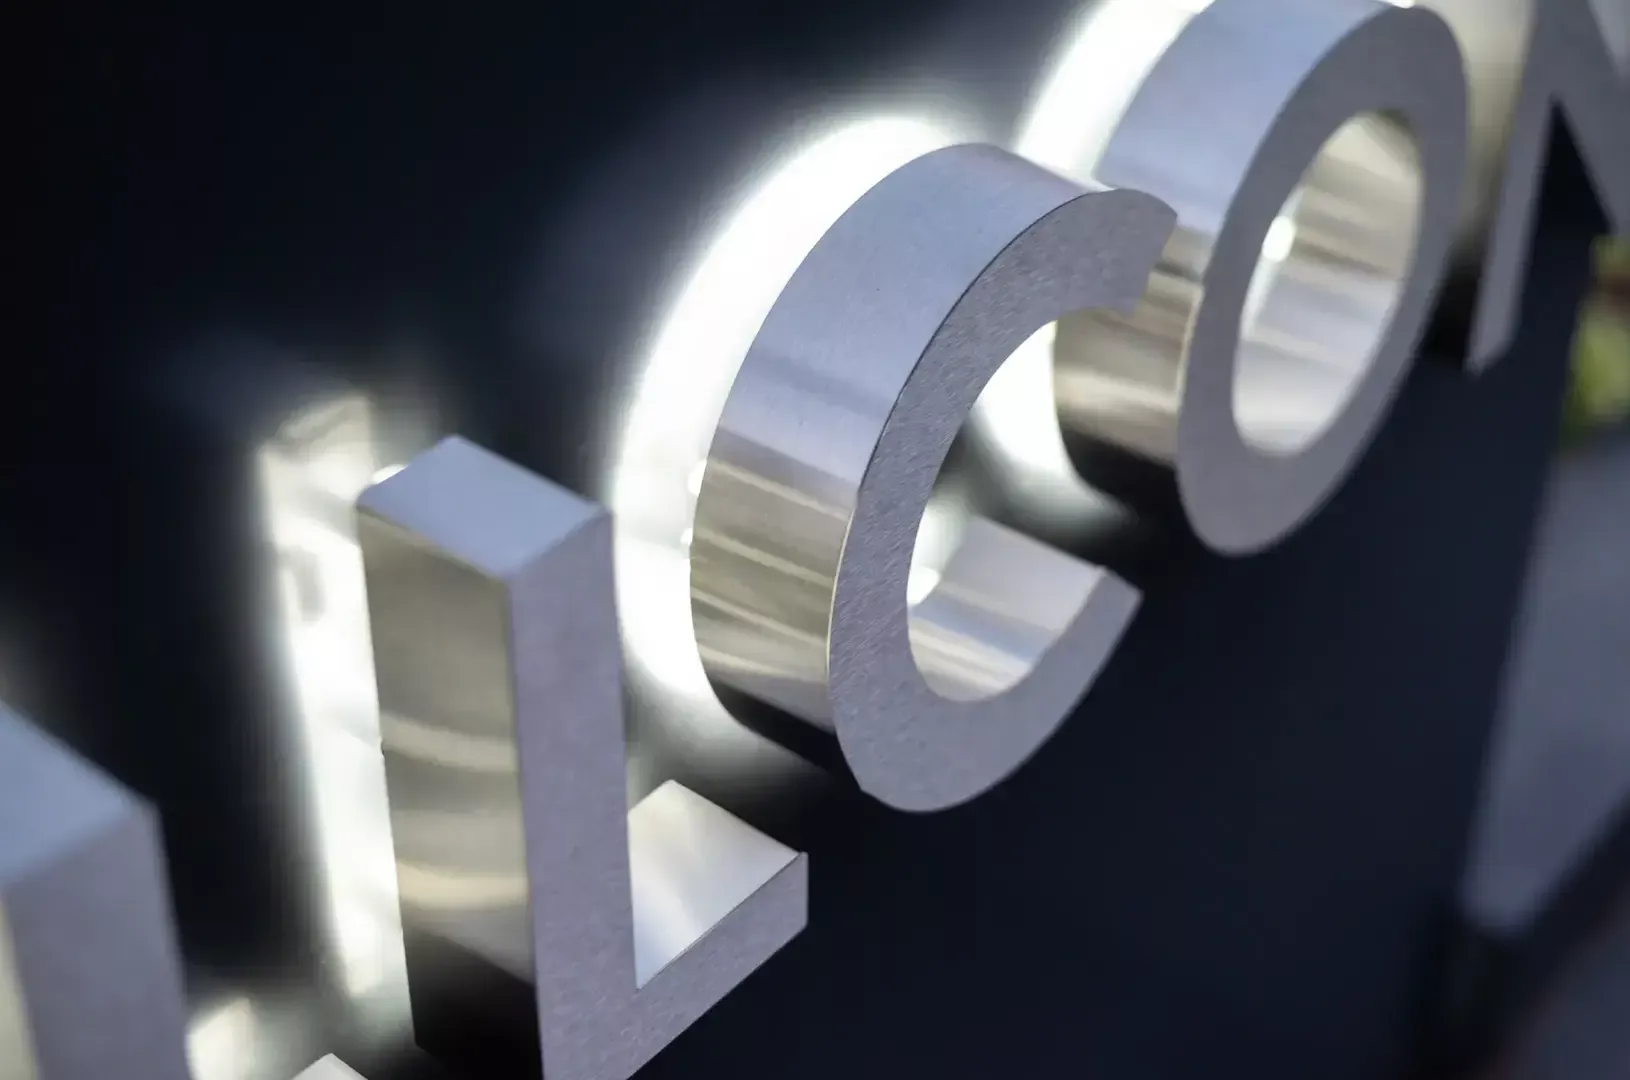 Allcon back-lit letters - Silver polished letters shining backwards on the wall Allcon